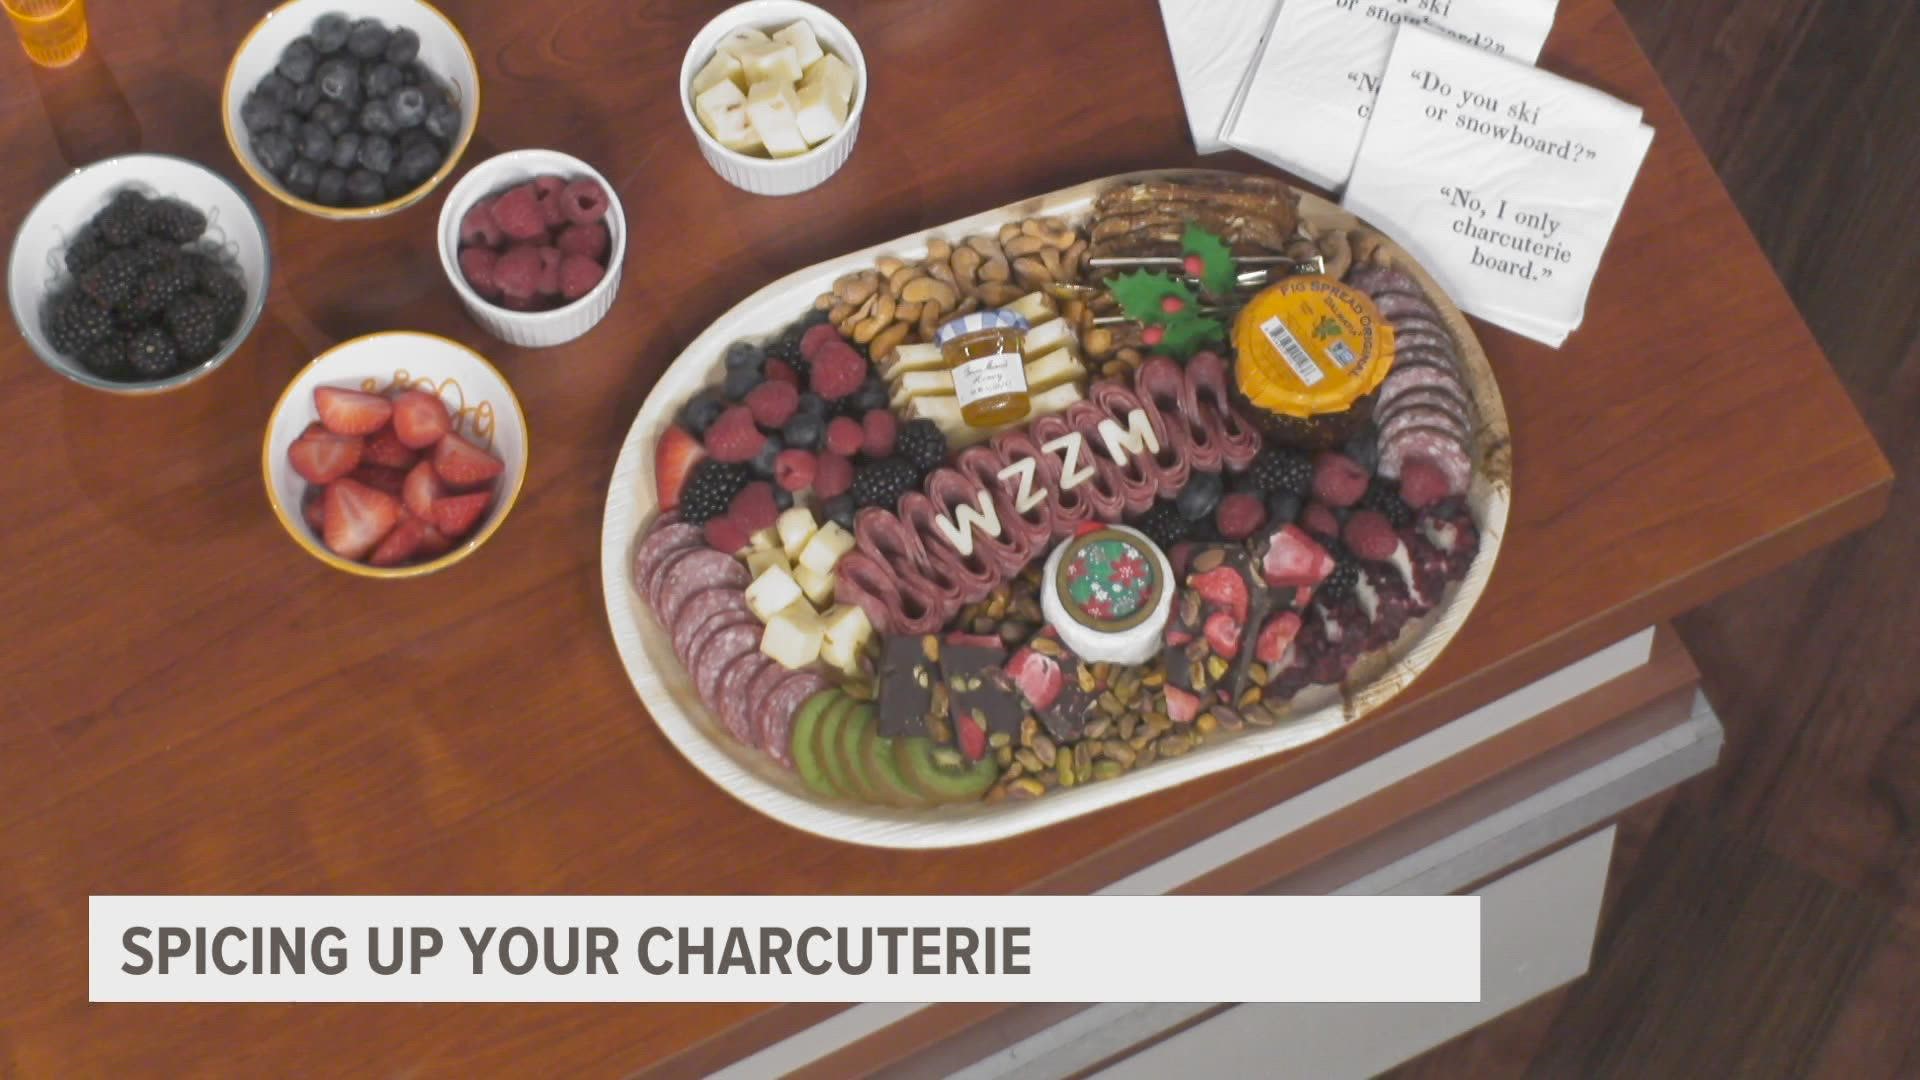 Kate Thompson joined 13 ON YOUR SIDE to show us how to make your charcuterie board a showstopper.